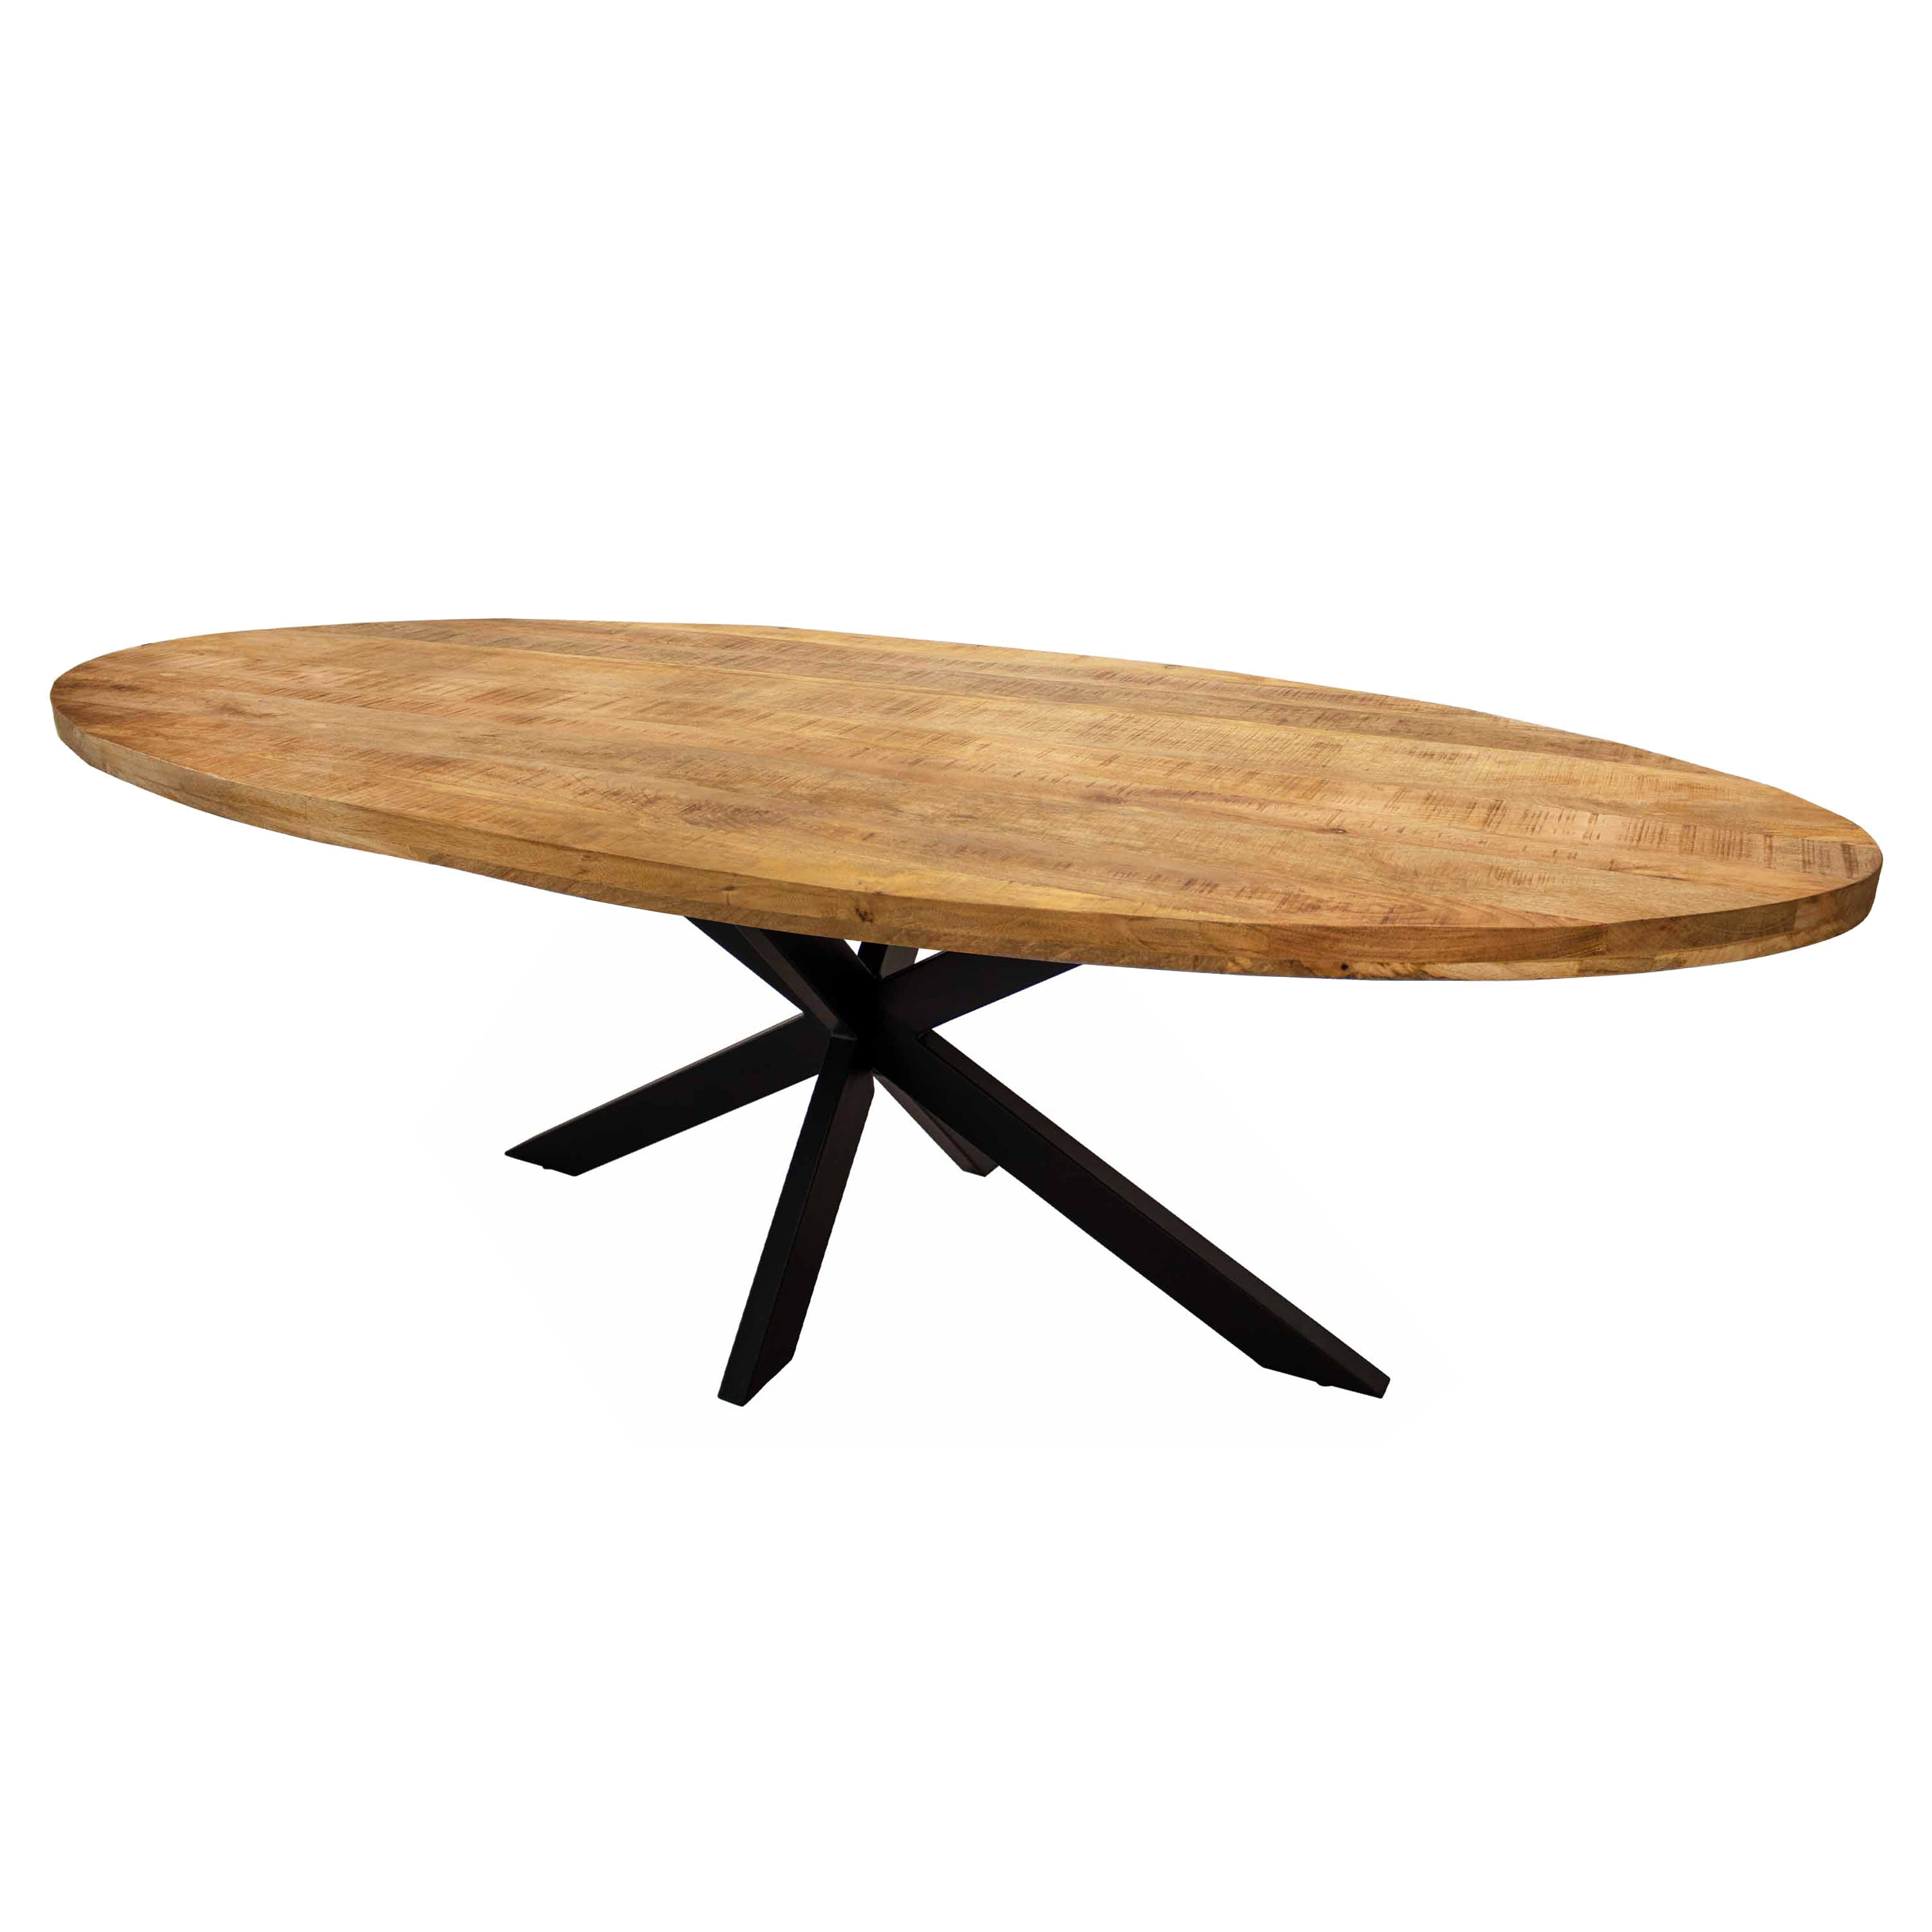 Kick dining table Dax oval - 180cm